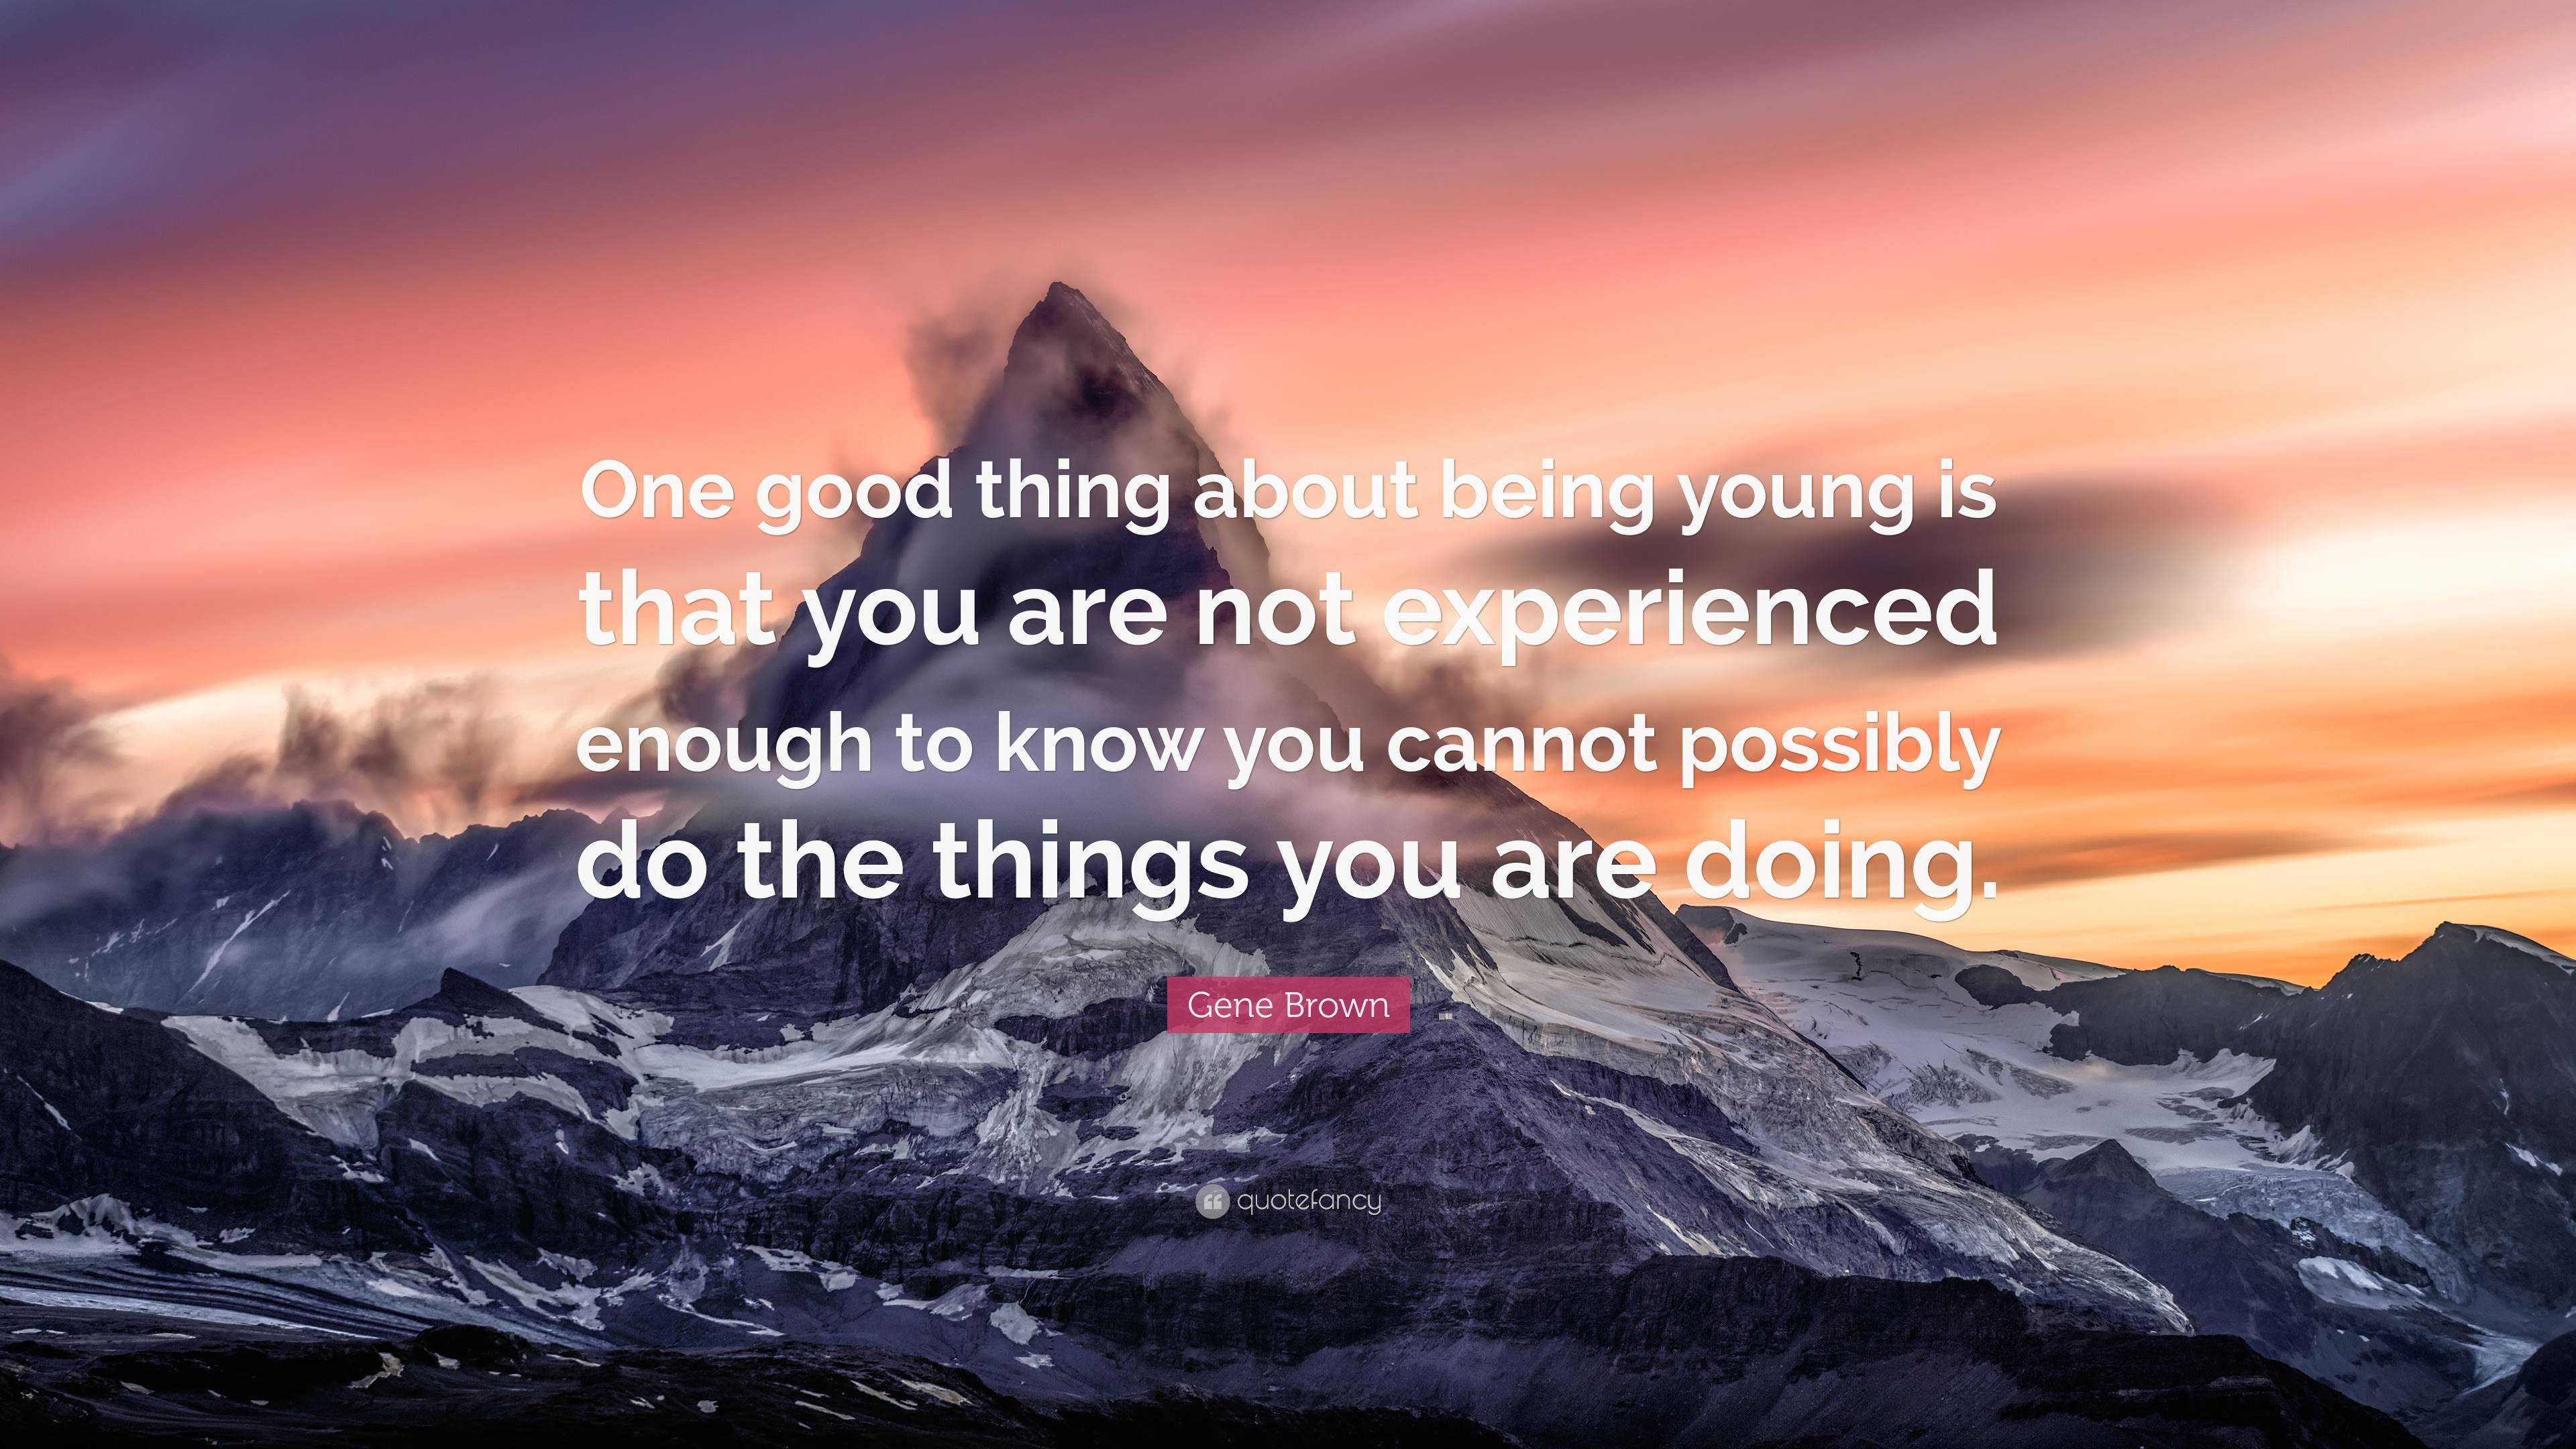 Gene Brown Quote: “One good thing about being young is that you are not ...